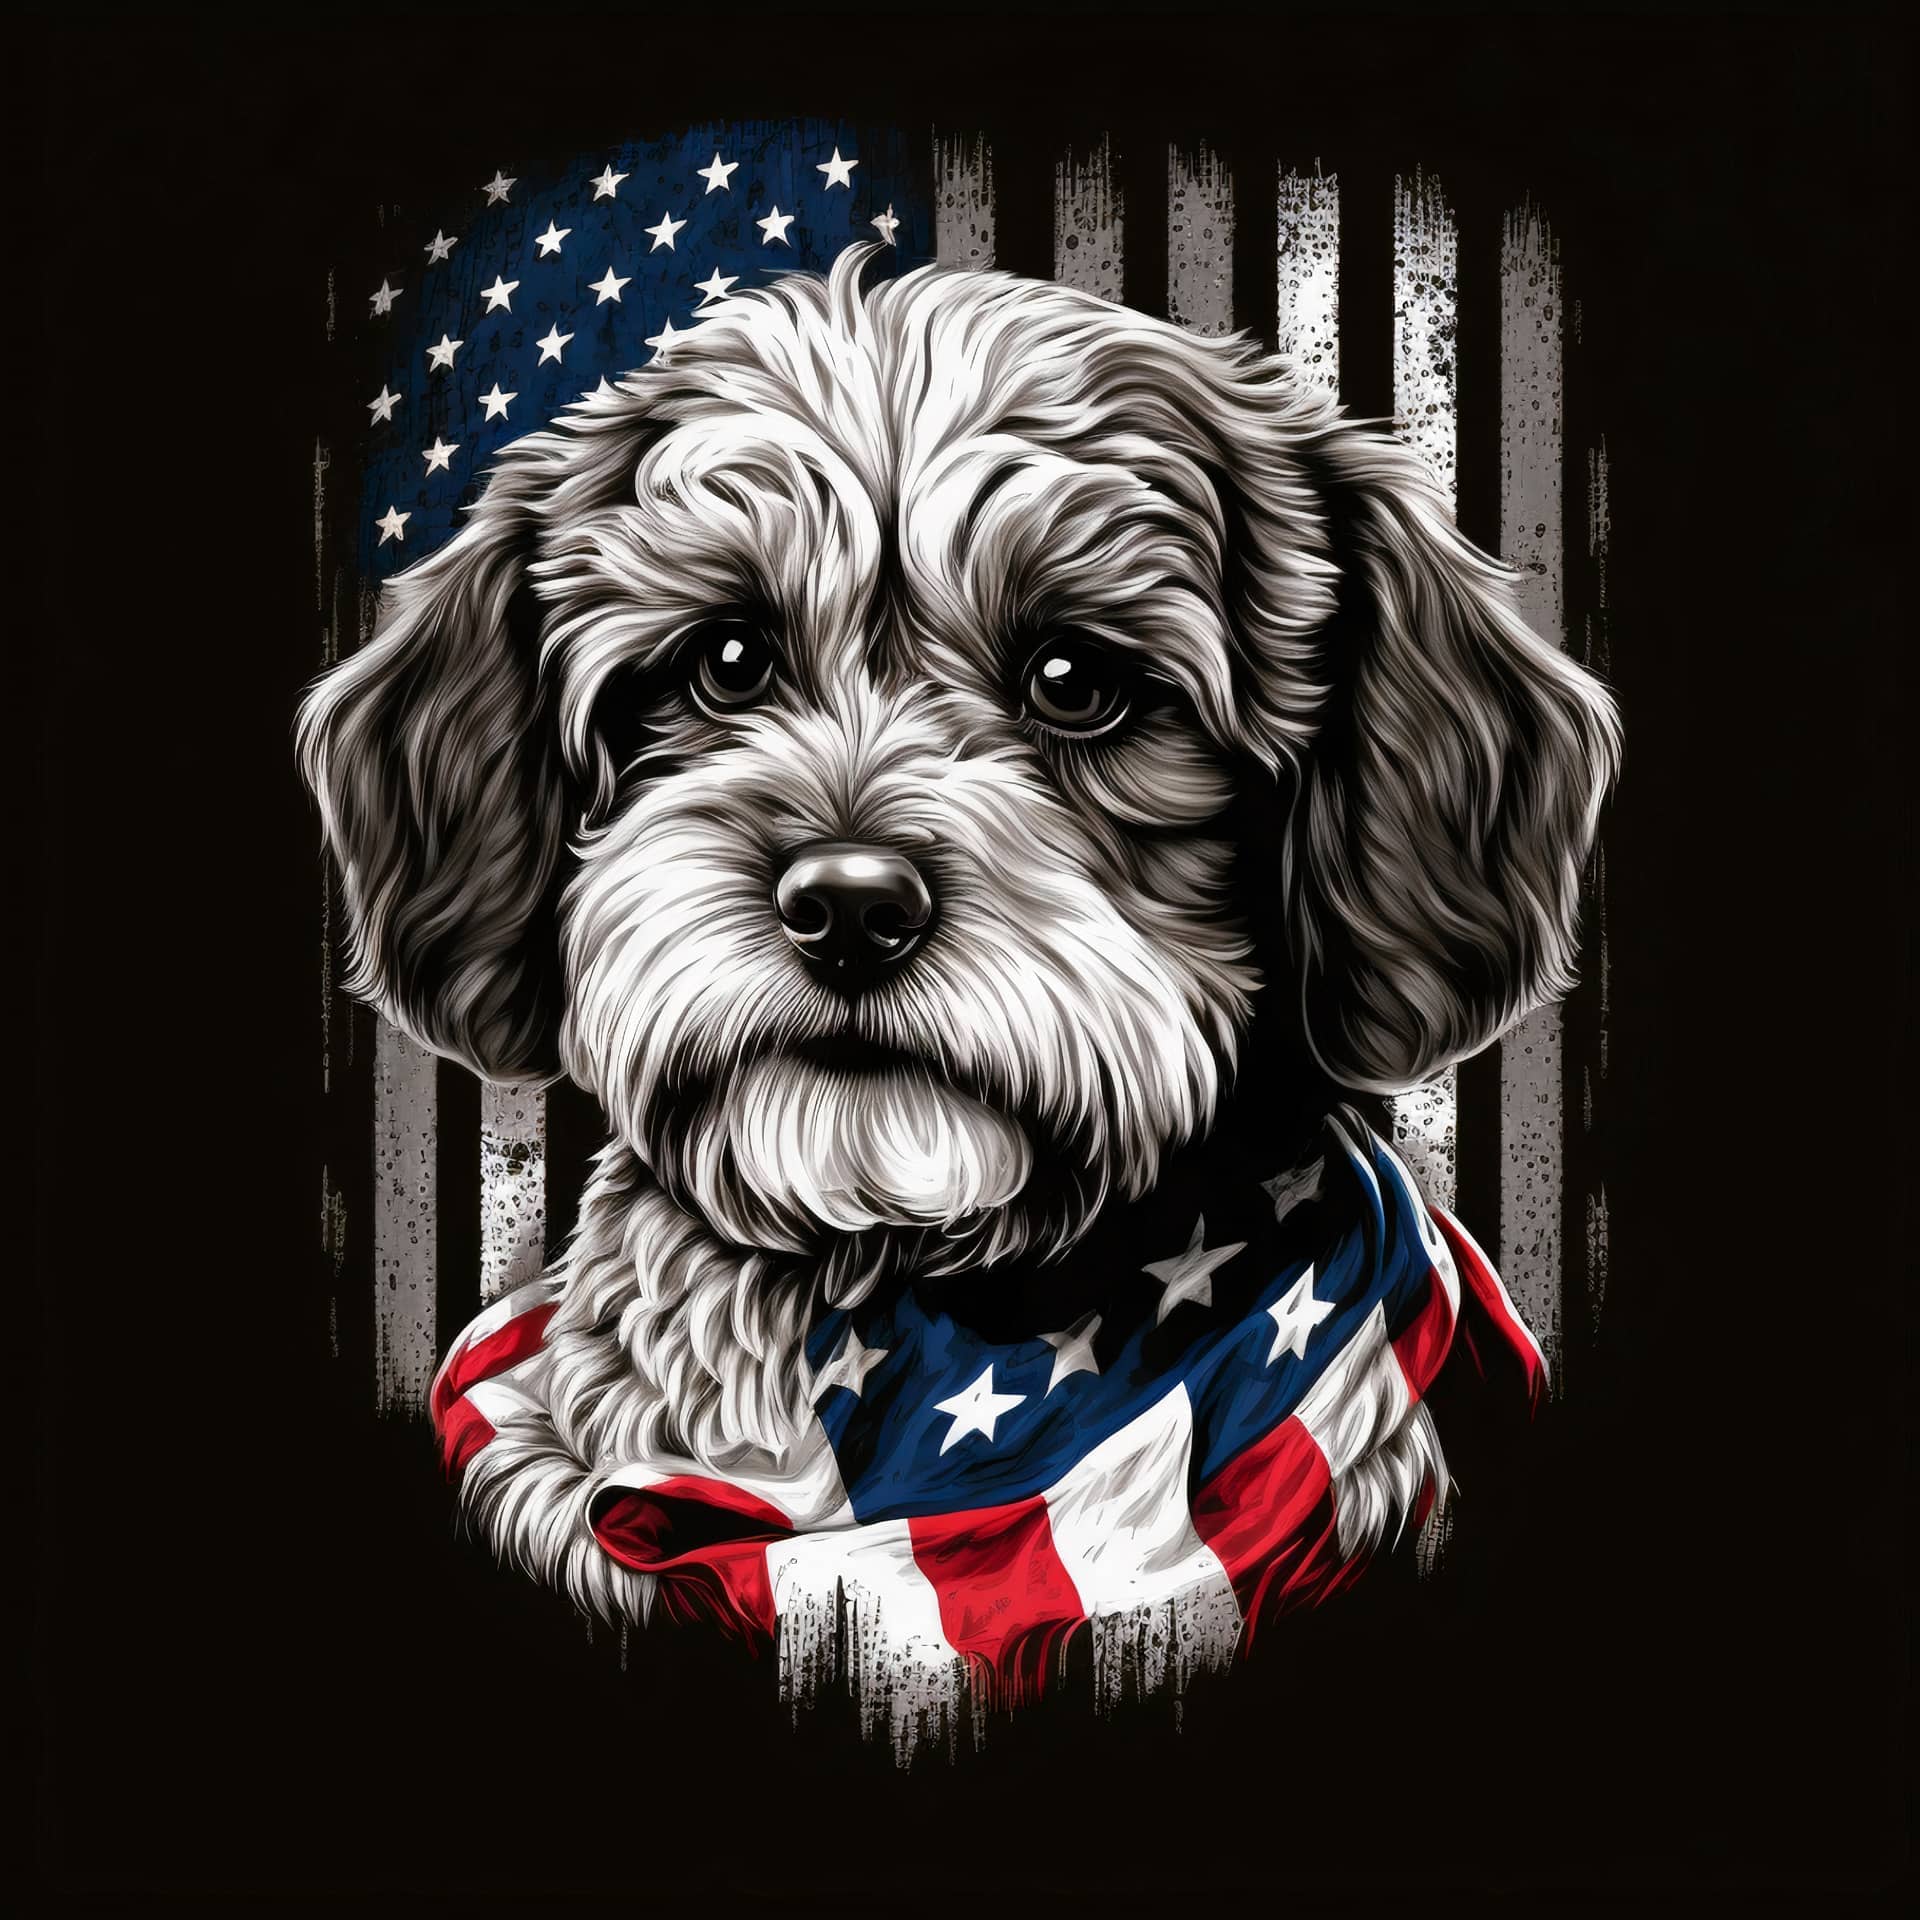 Facebook profile pic dog design with american flag image